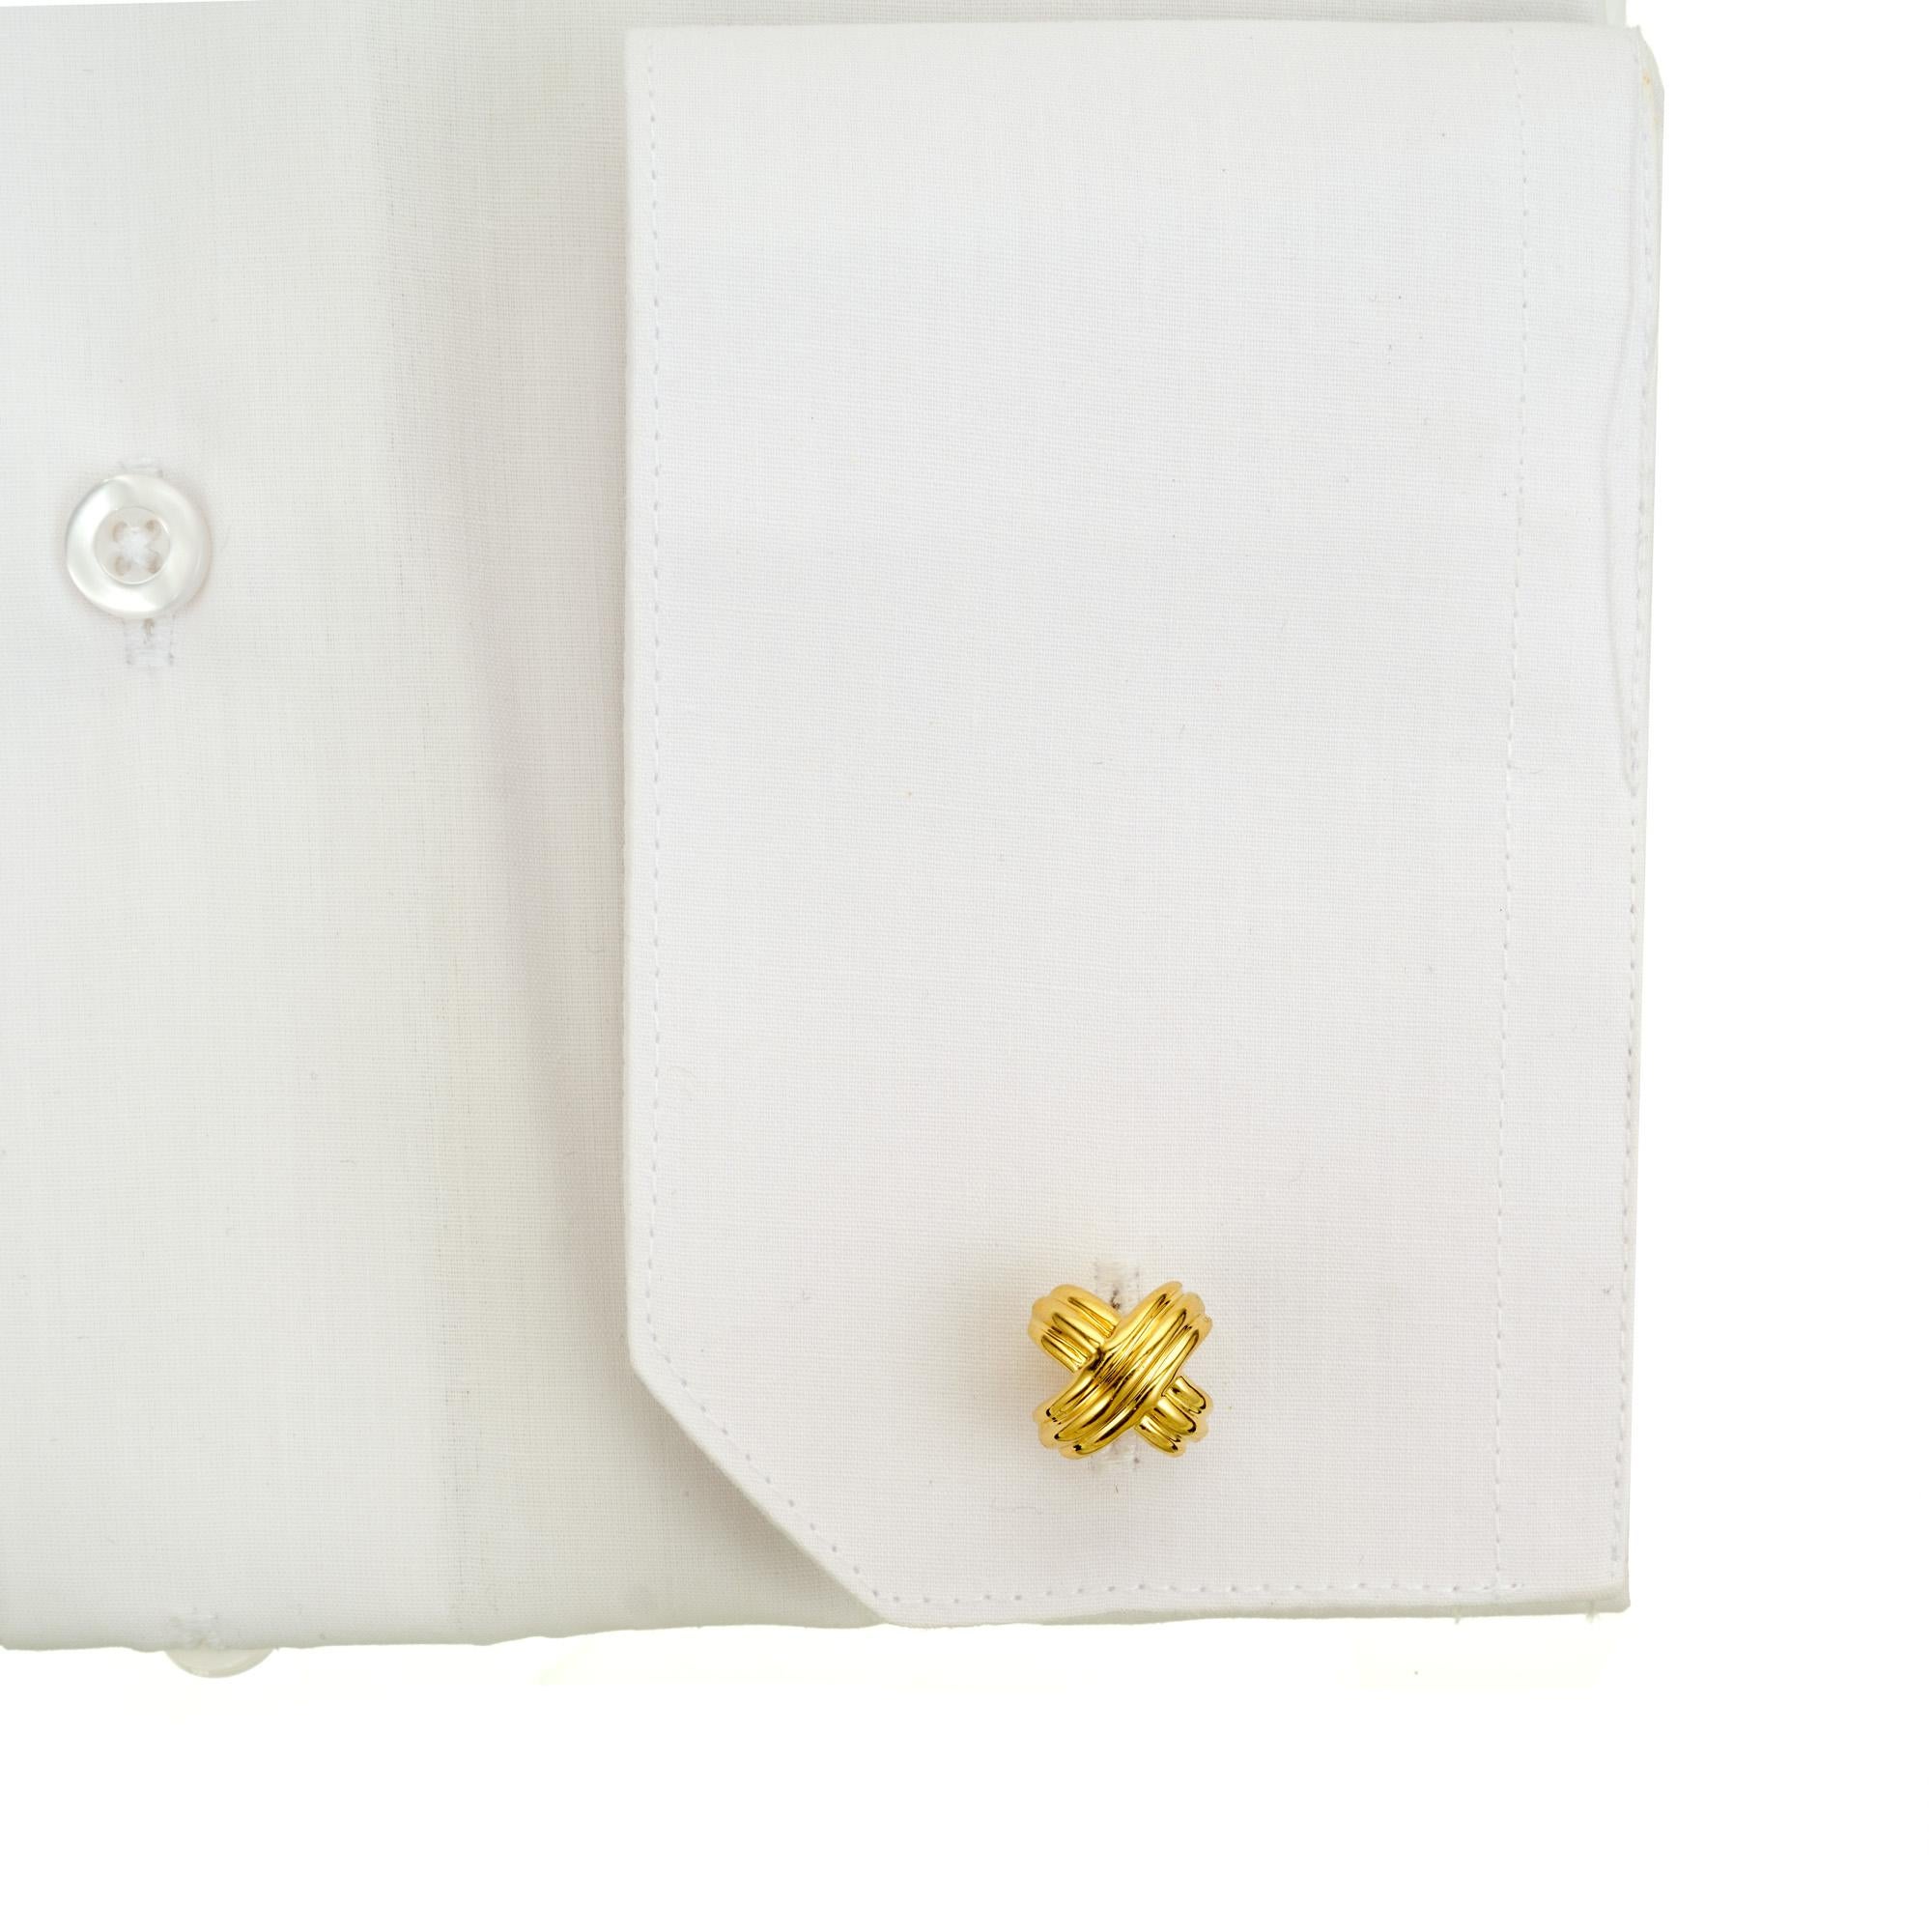 Tiffany & Co Yellow Gold Signature X Cufflinks For Sale 2